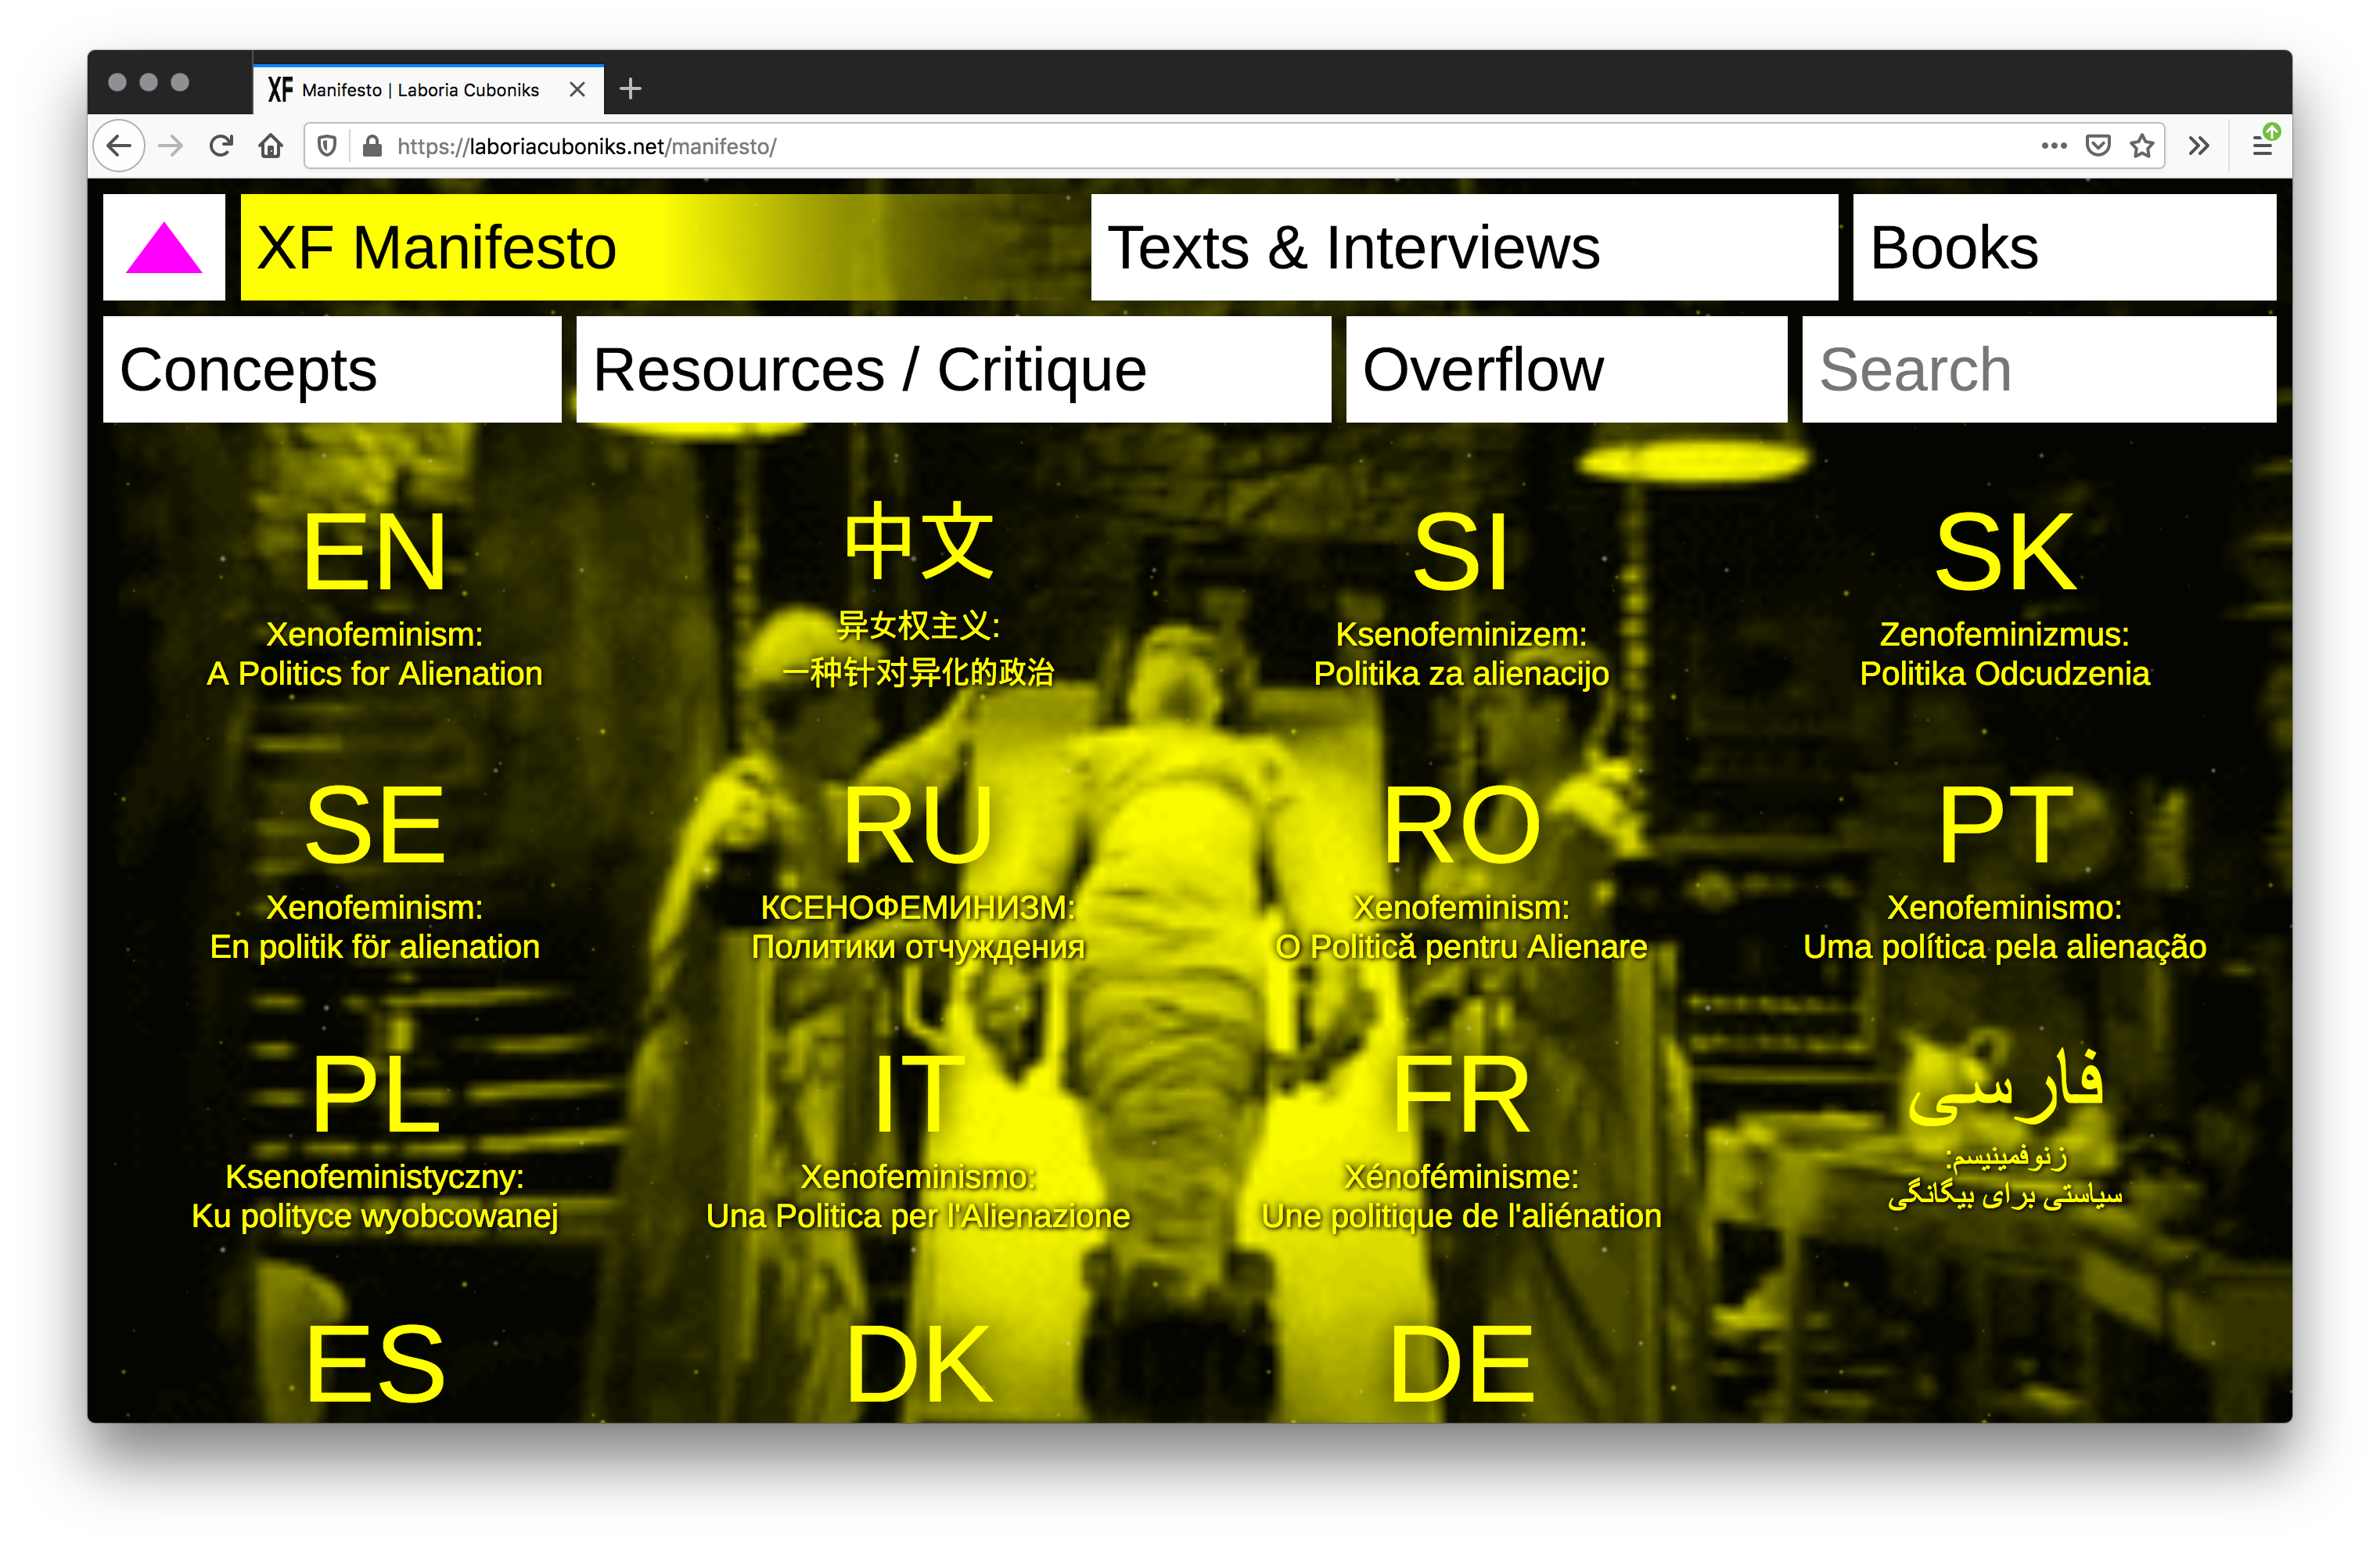 Screenshot of a yellow webpage two scientists in a lab observing a mummy on a metal bed in the background. On top are two rows of white tabs with "XF Manifesto" highlighted in yellow. Four rows of language initials and translated titles fill the page.